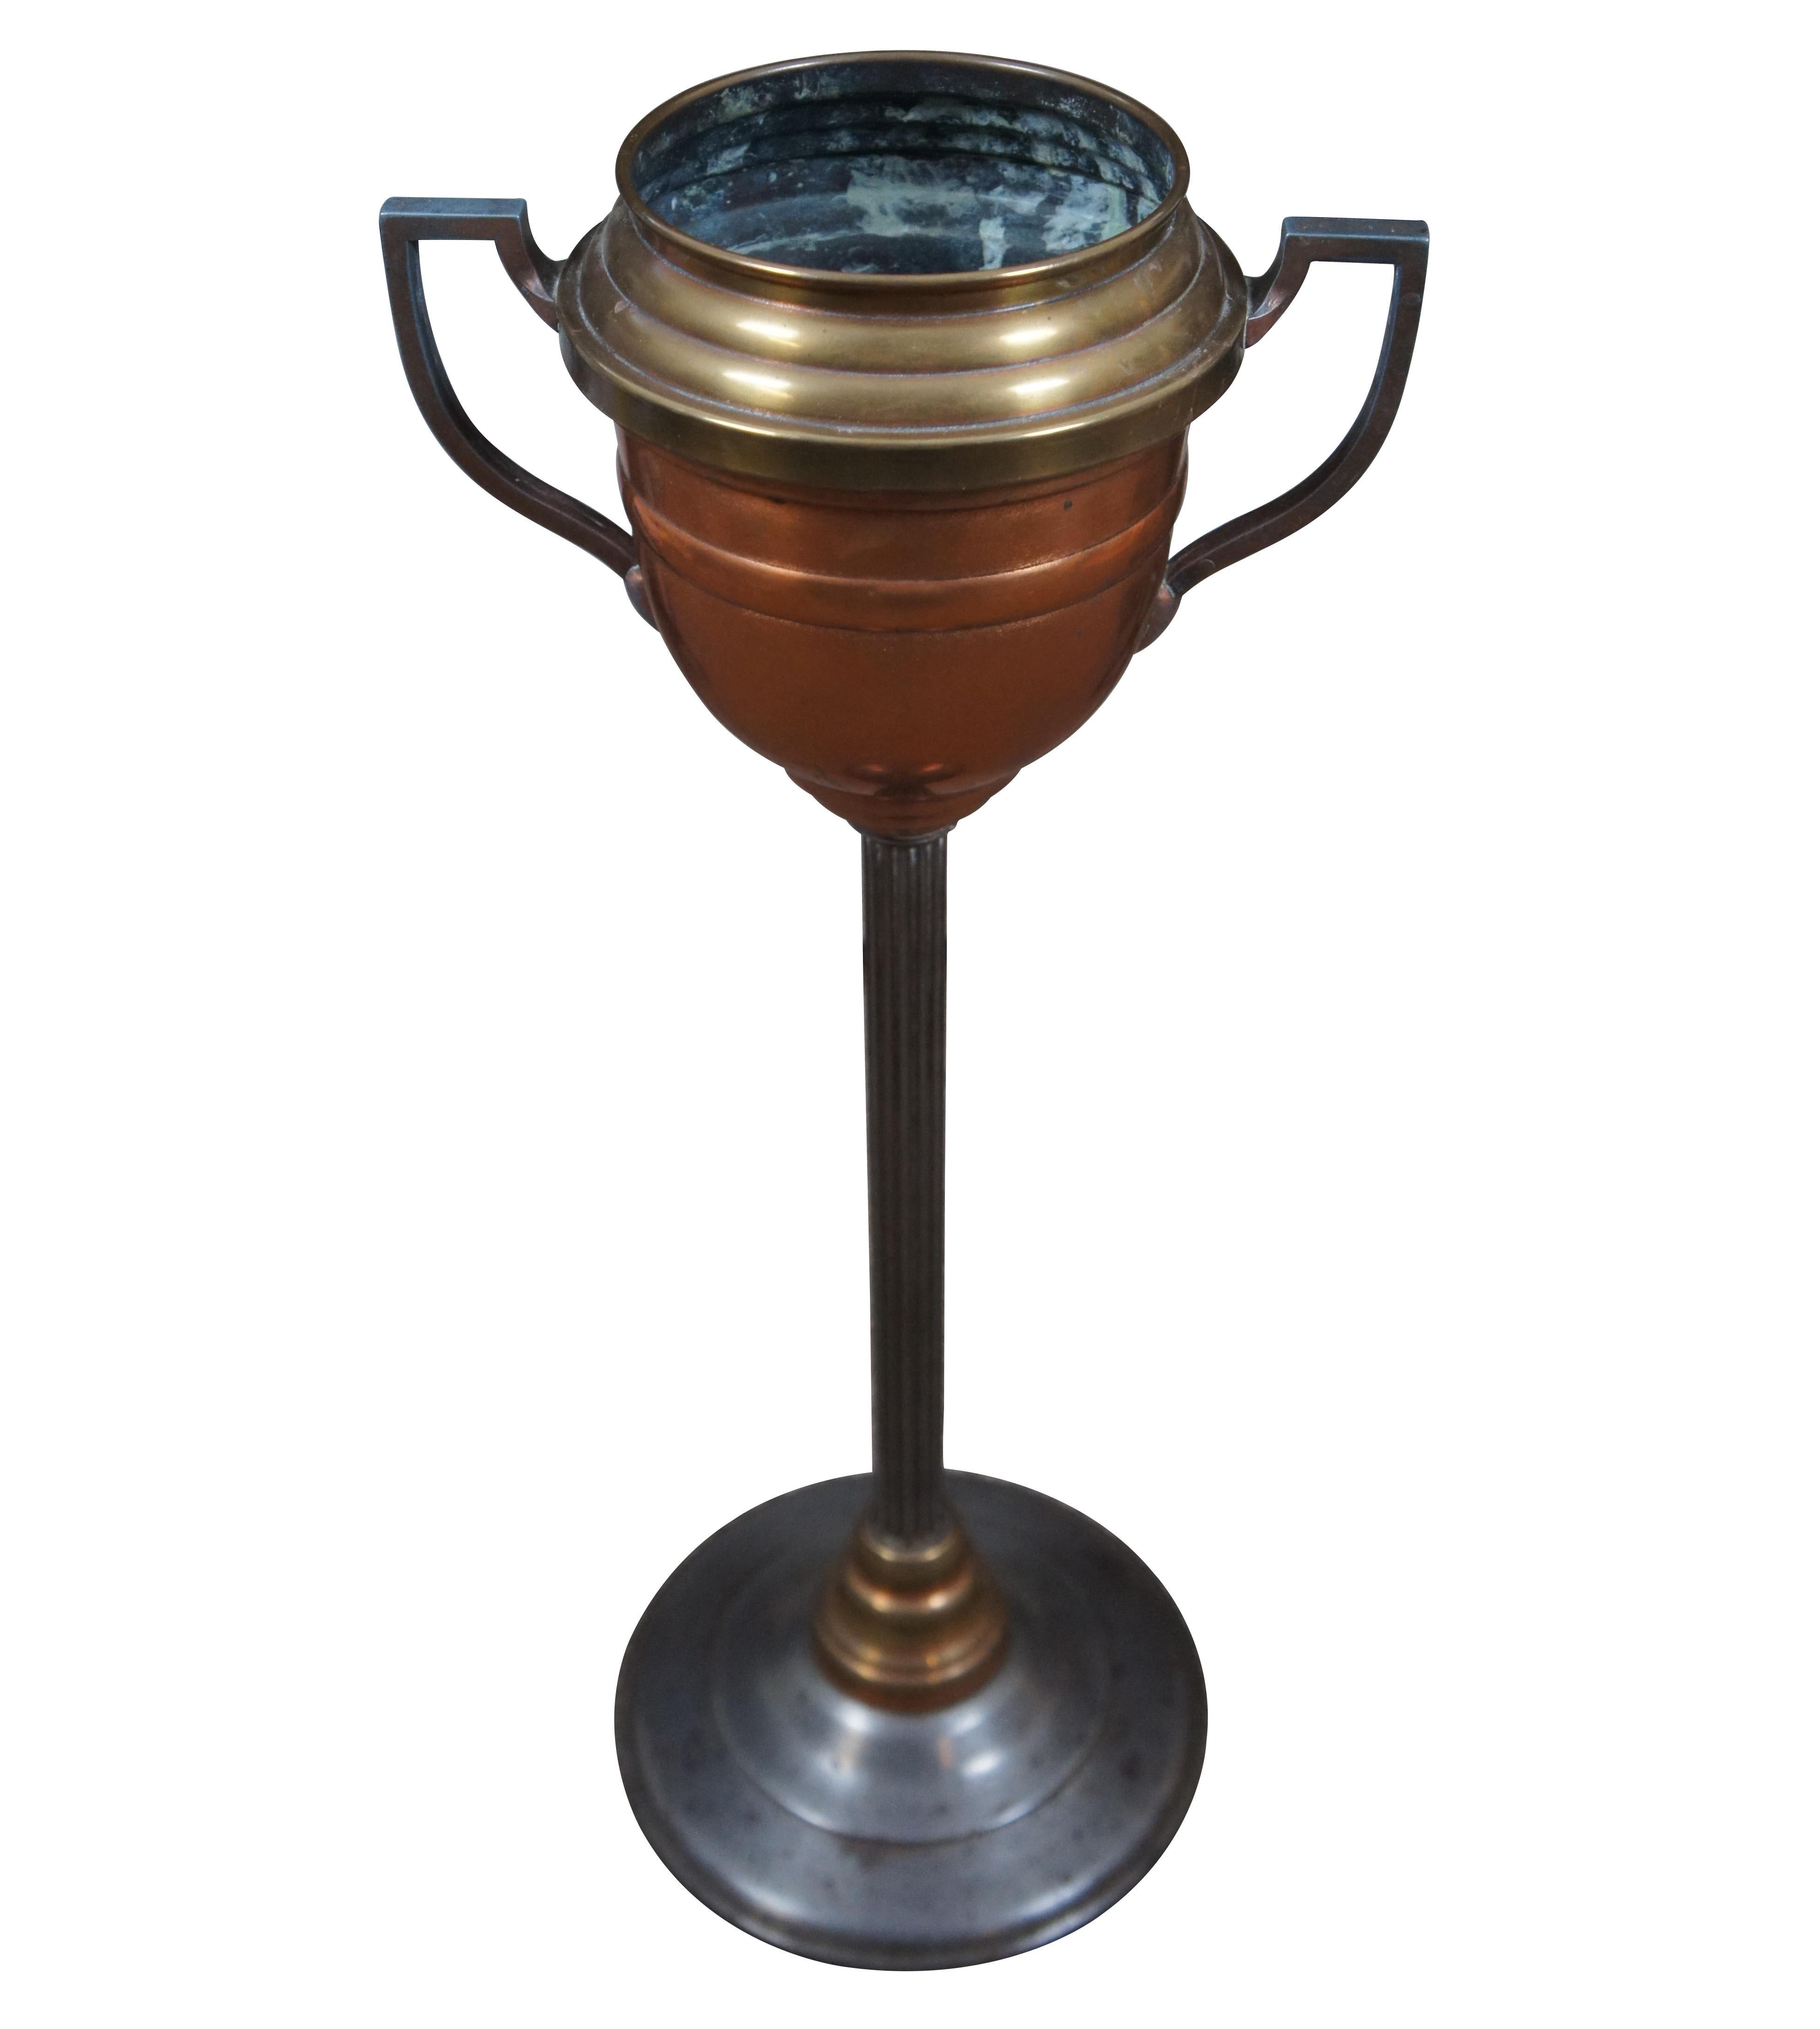 Vintage Mid-20th Century wine chiller / cooler / ice bucket stand with iron base and fluted column supporting a copper and brass neoclassical trophy urn shaped bucket.